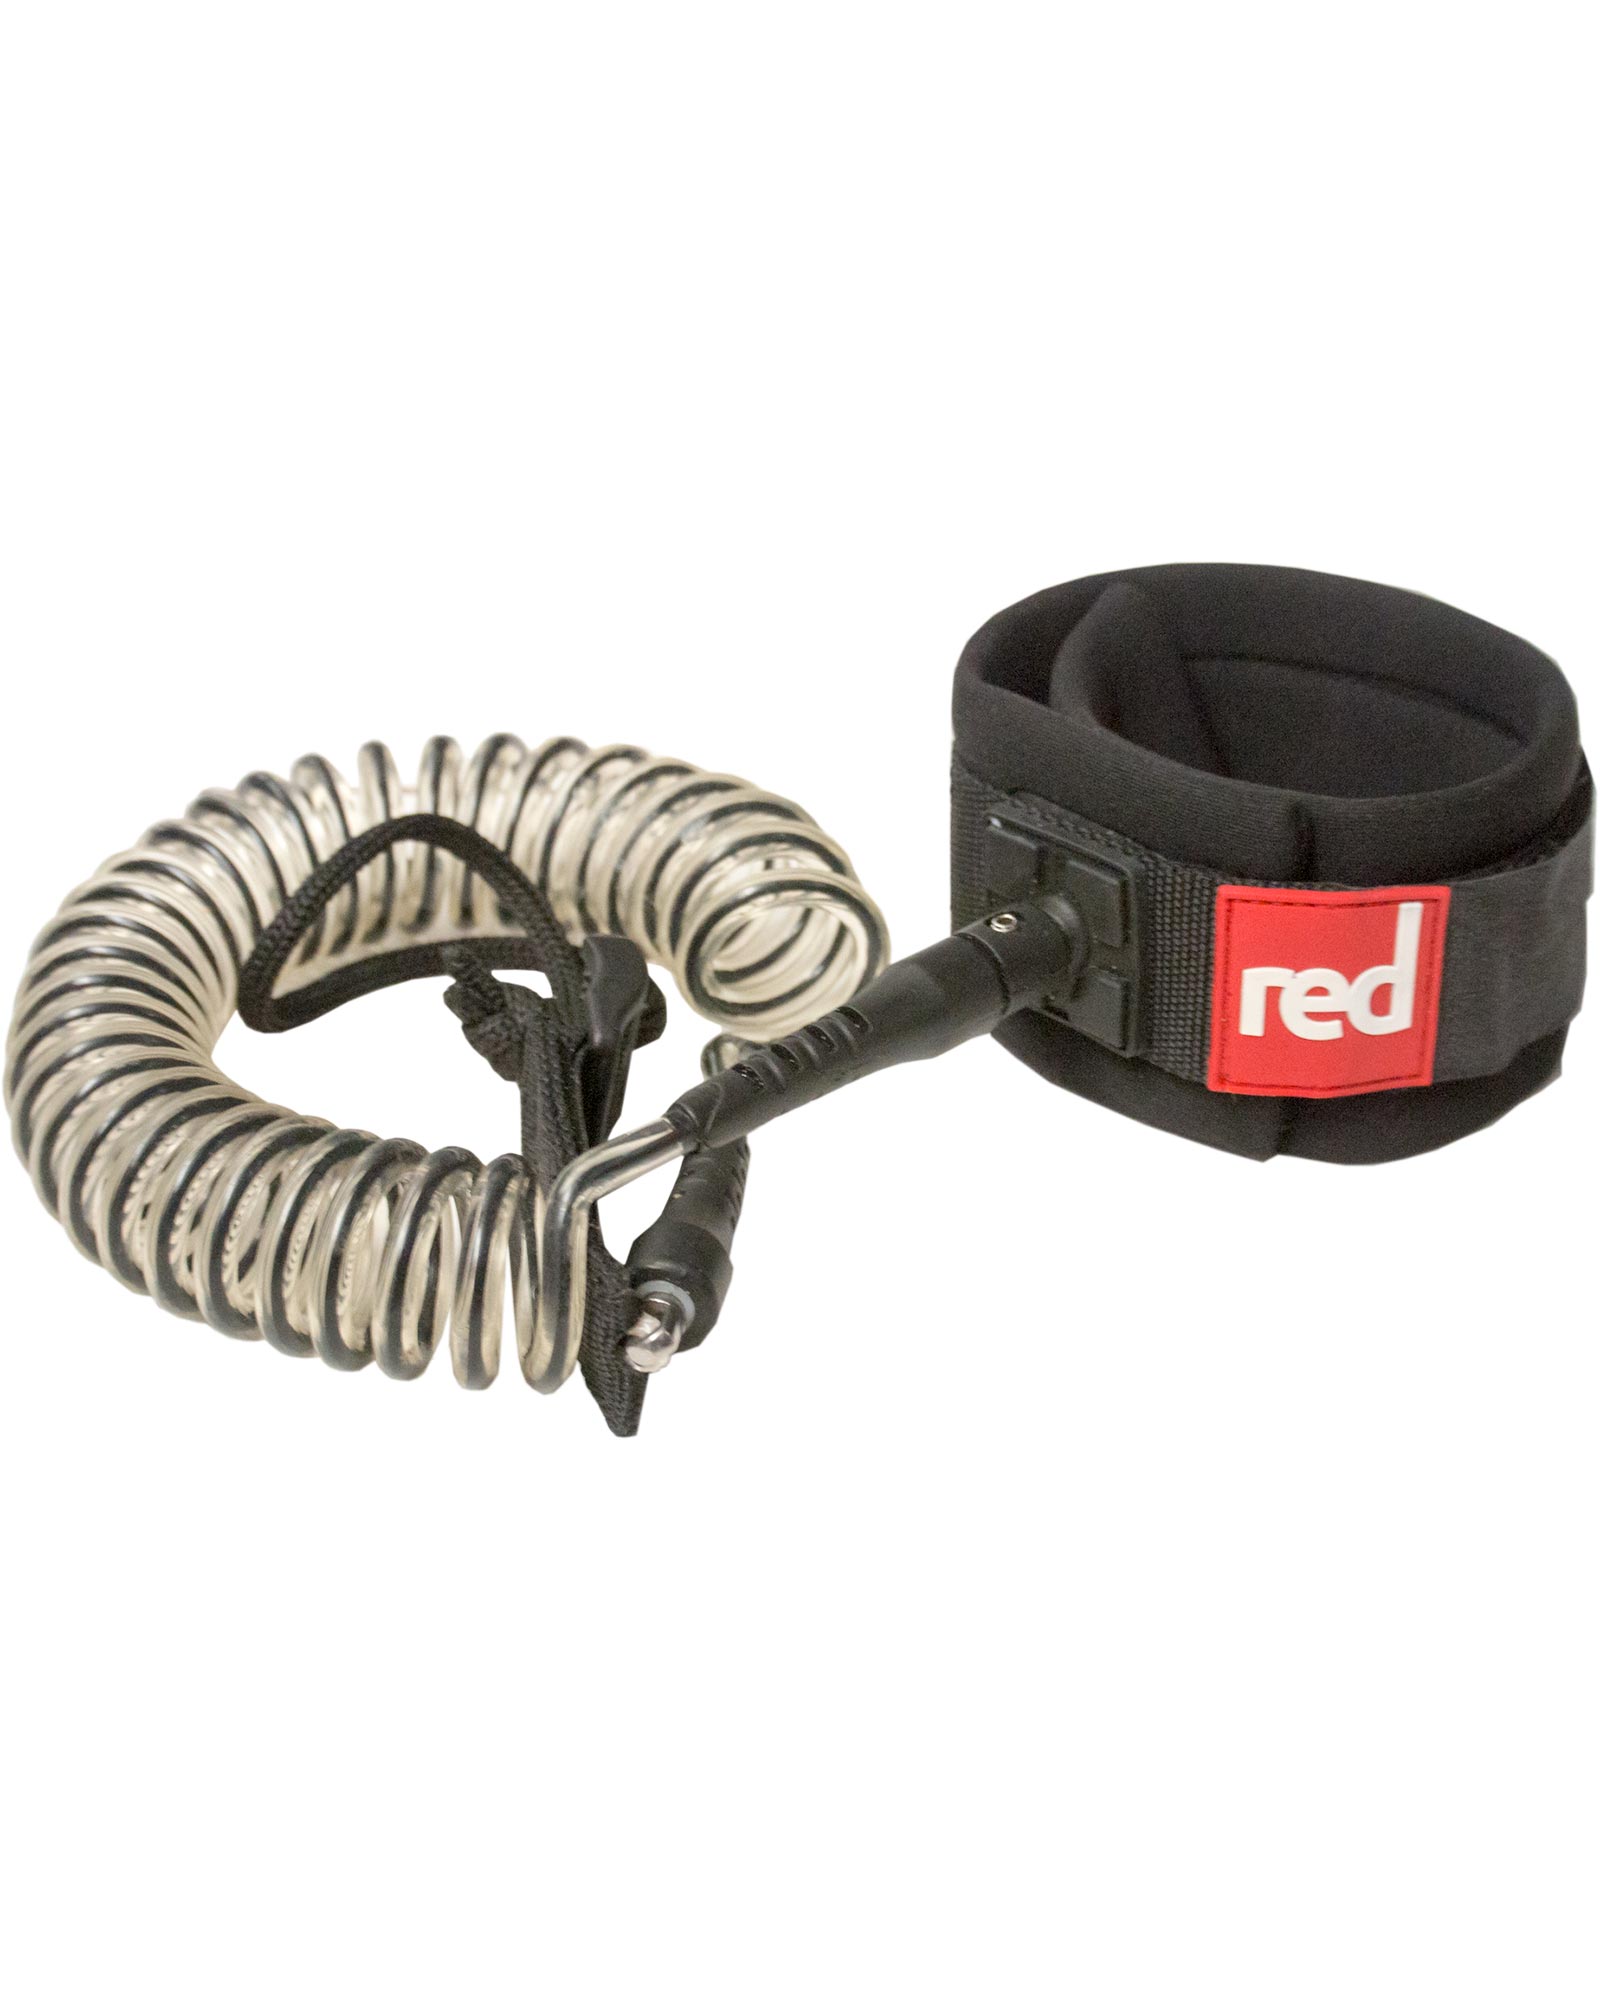 Red Coiled Leash 8ft